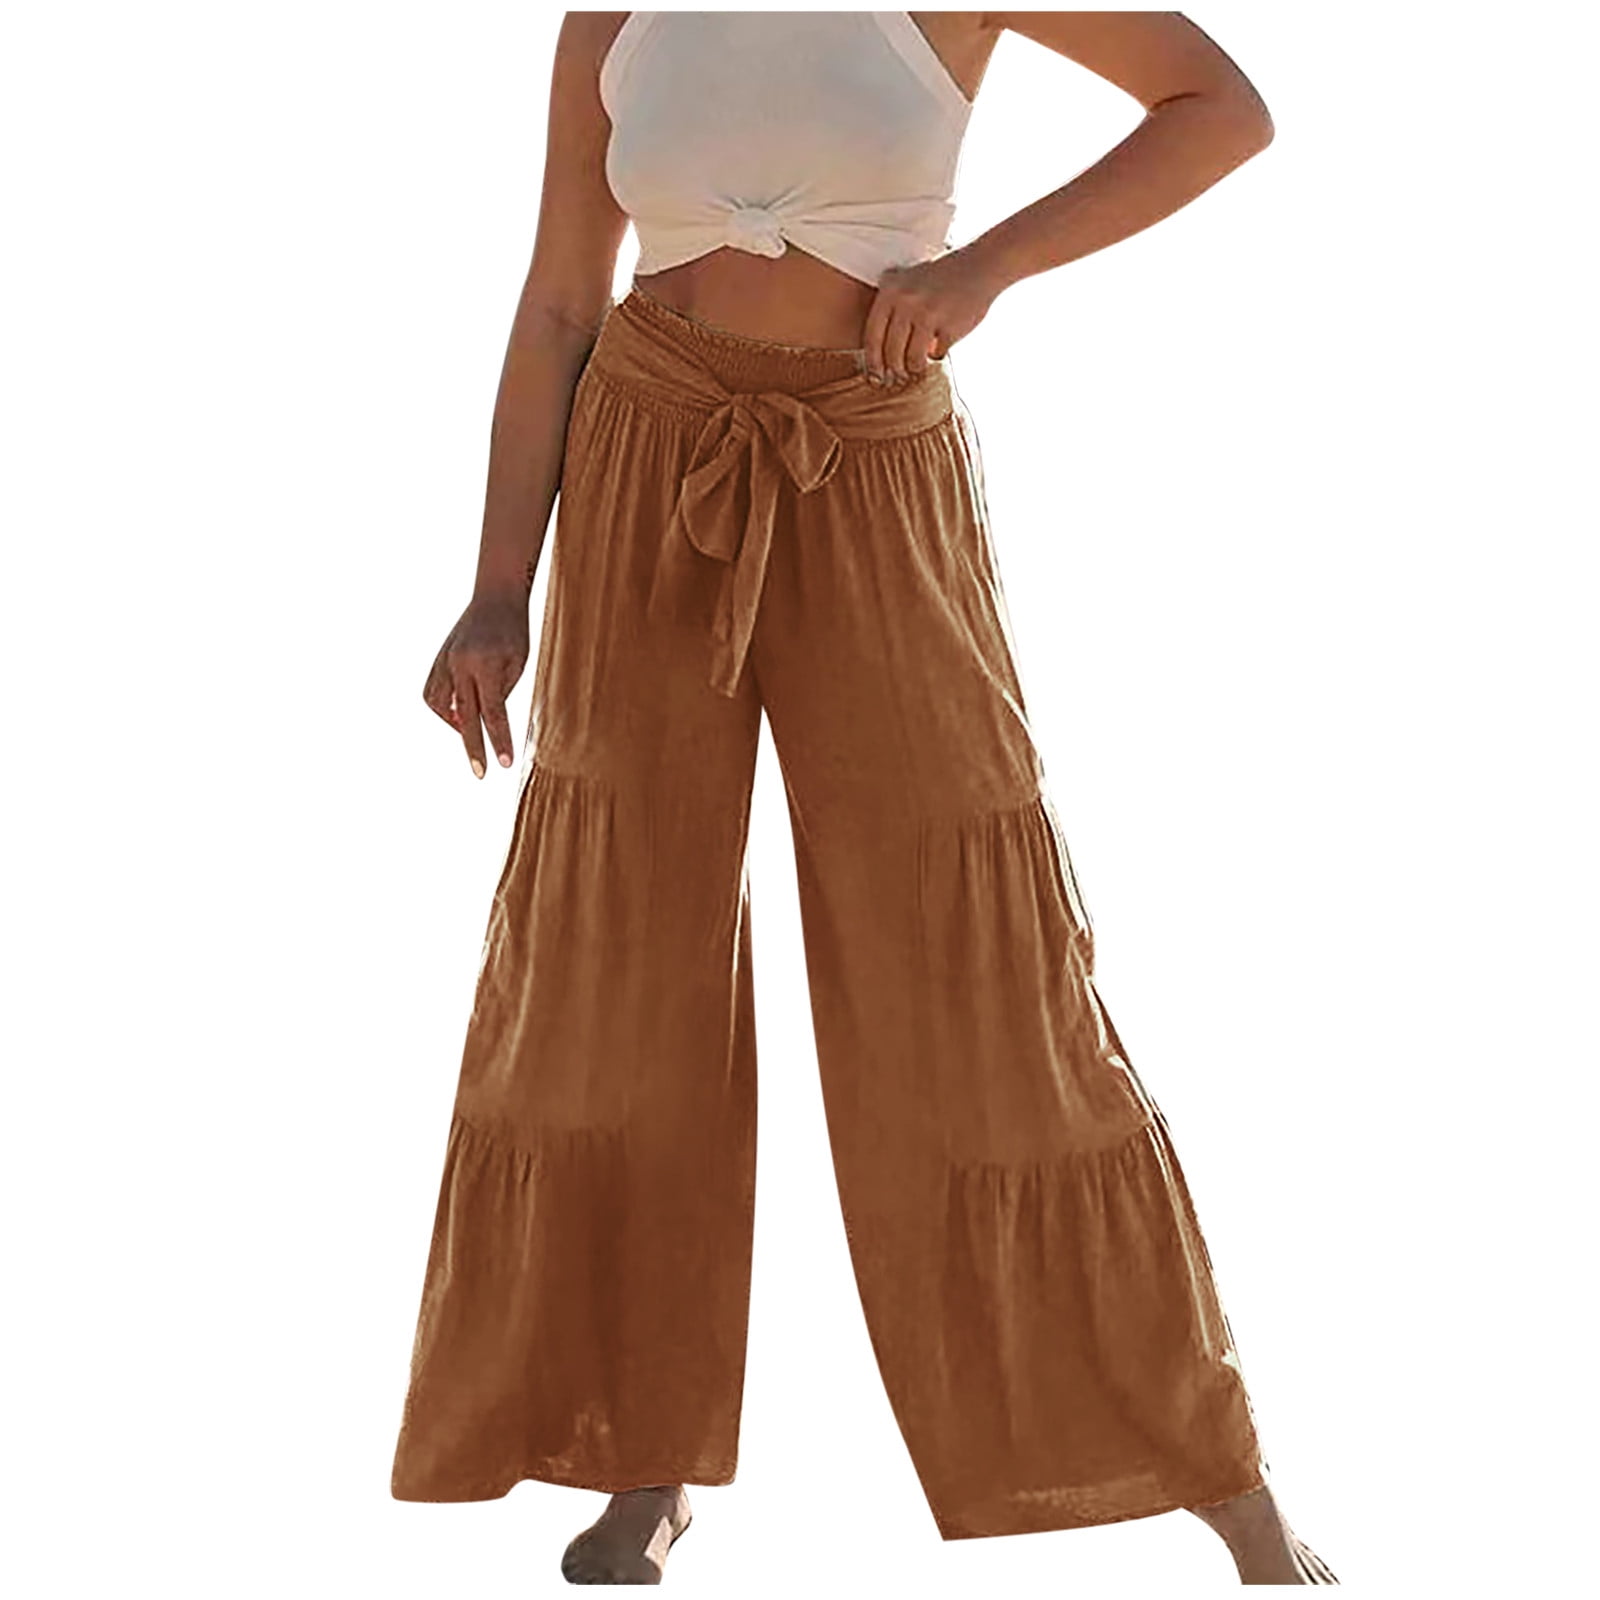 Palazzo Pants for Women High Waisted Tie Front Solid Color Ruffle Wide Leg  Pants Casual Baggy Flowy Lounge Trousers Ladies Clothes 